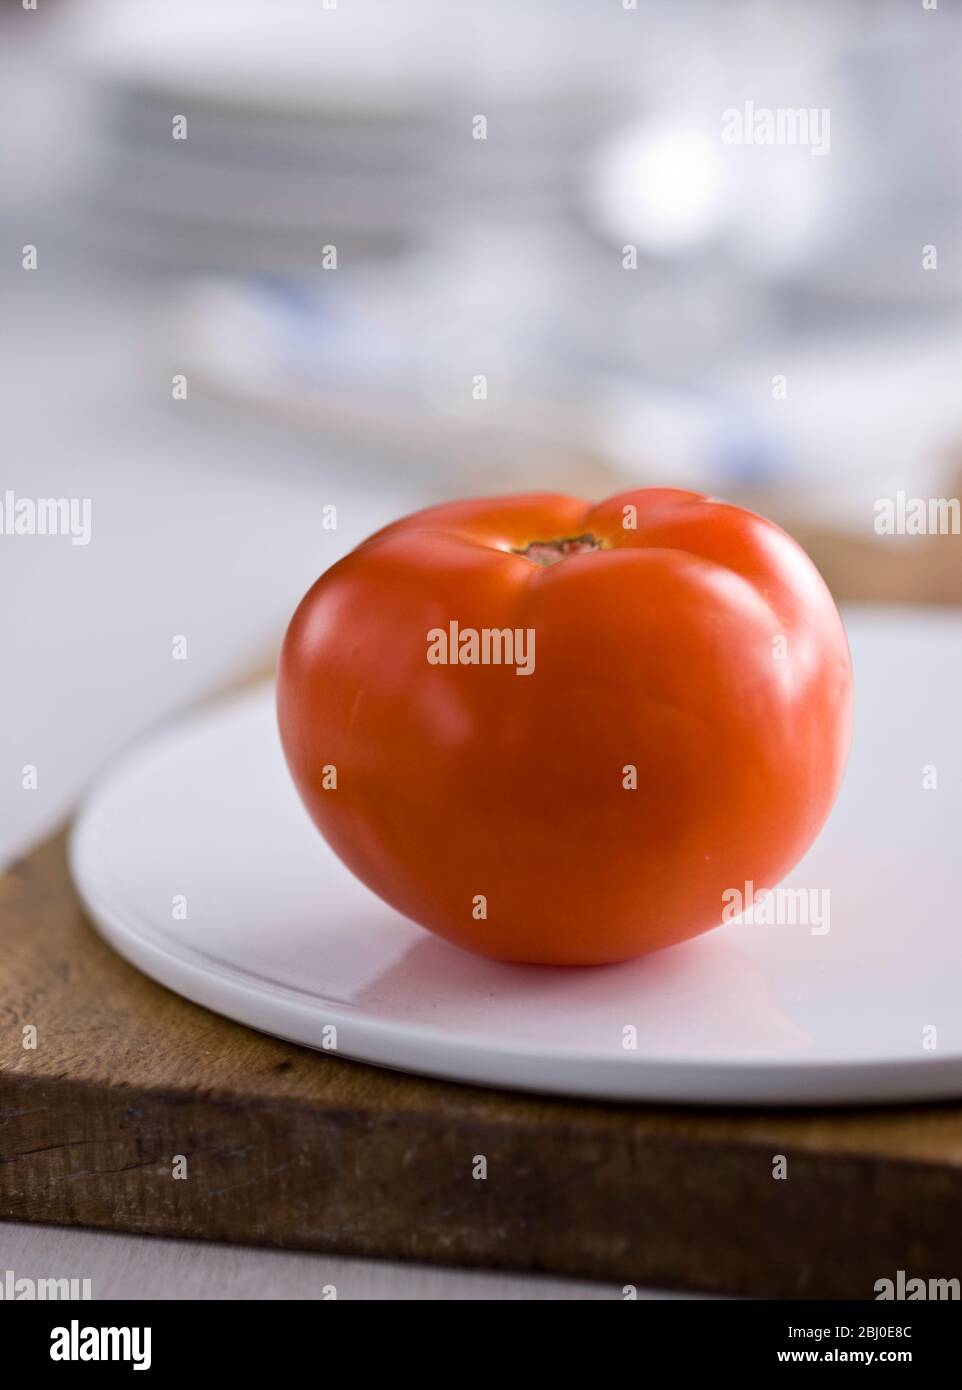 Single red tomato on white platter on wooden board - Stock Photo